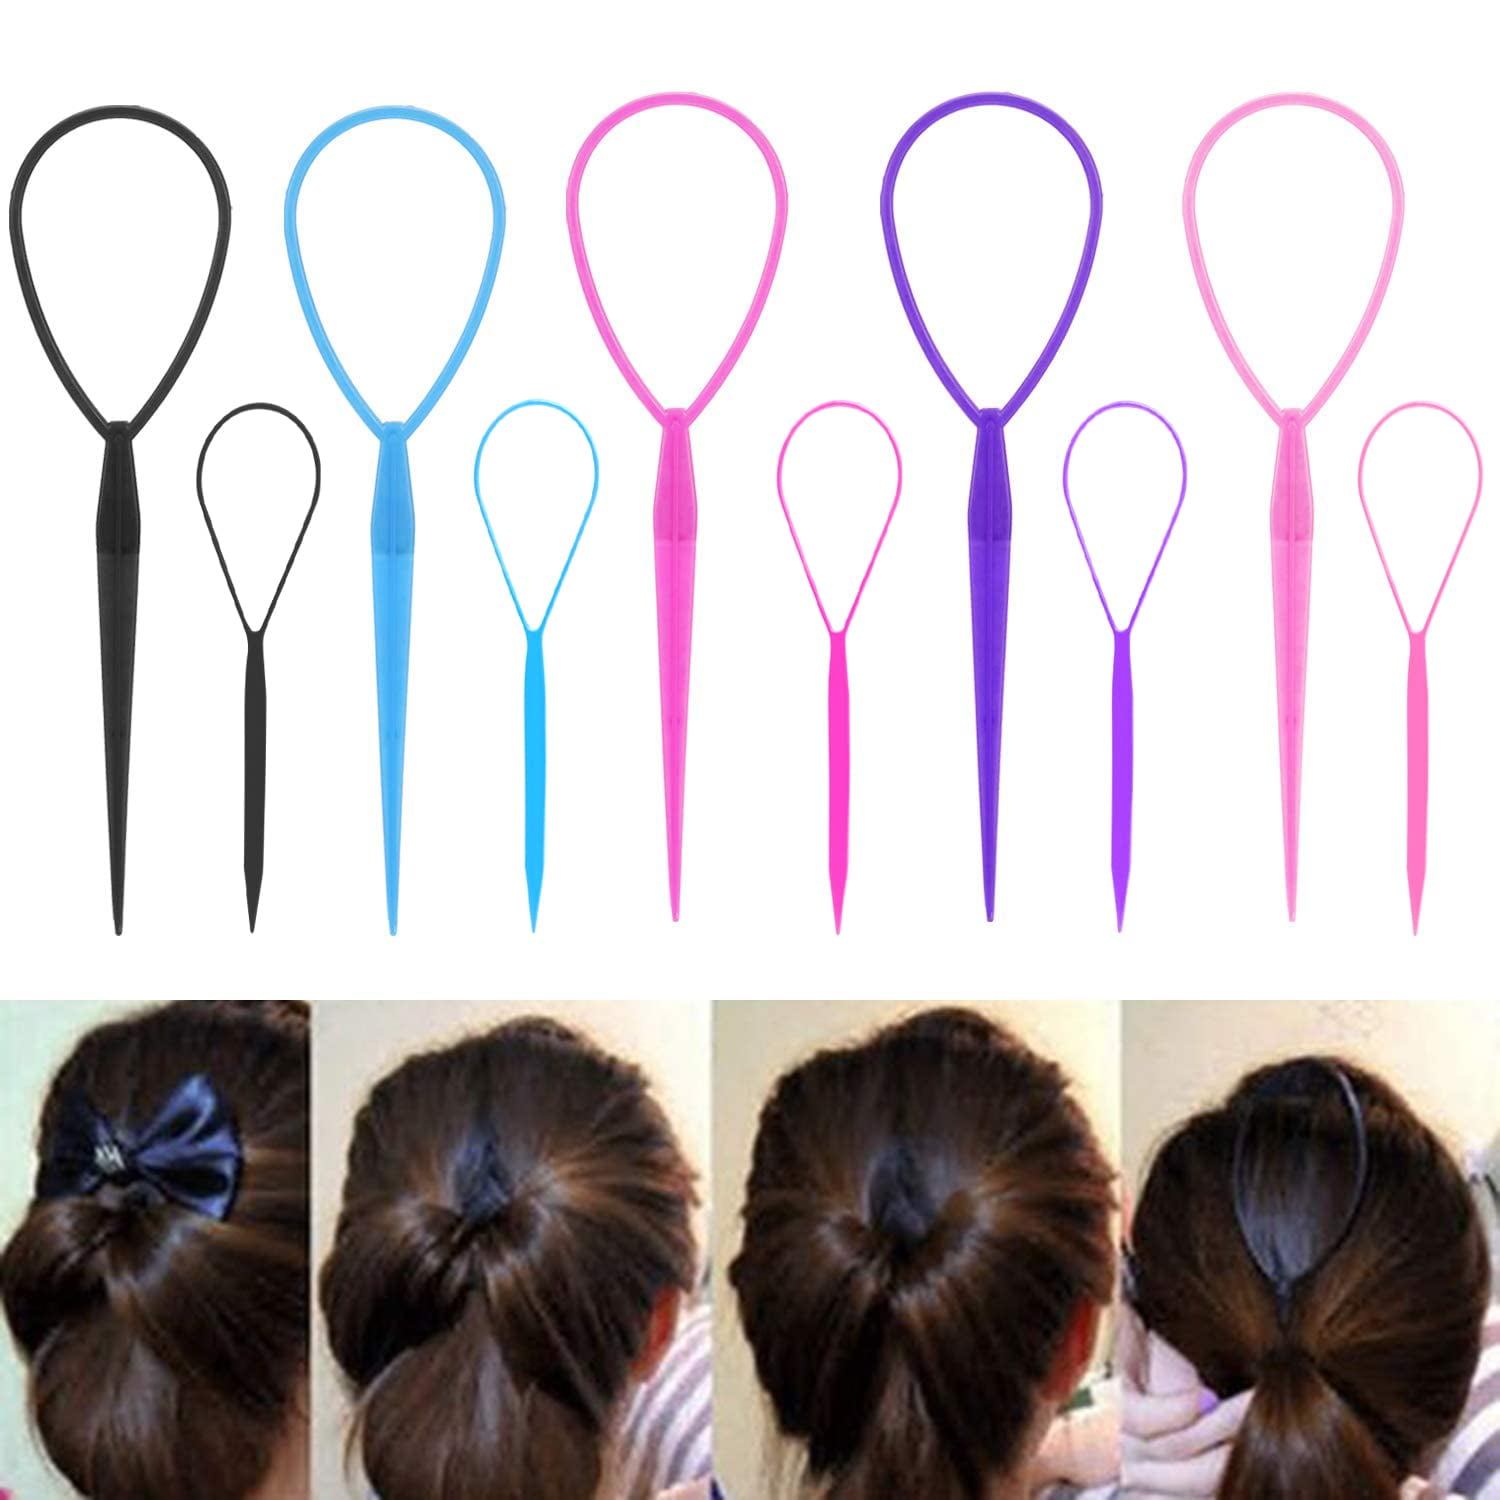  20Pcs Hair Tail Tools Set,Ponytail Maker Hair Braiding Tool for  Women Girls Styling Maker Hair Styling Accessories : Beauty & Personal Care